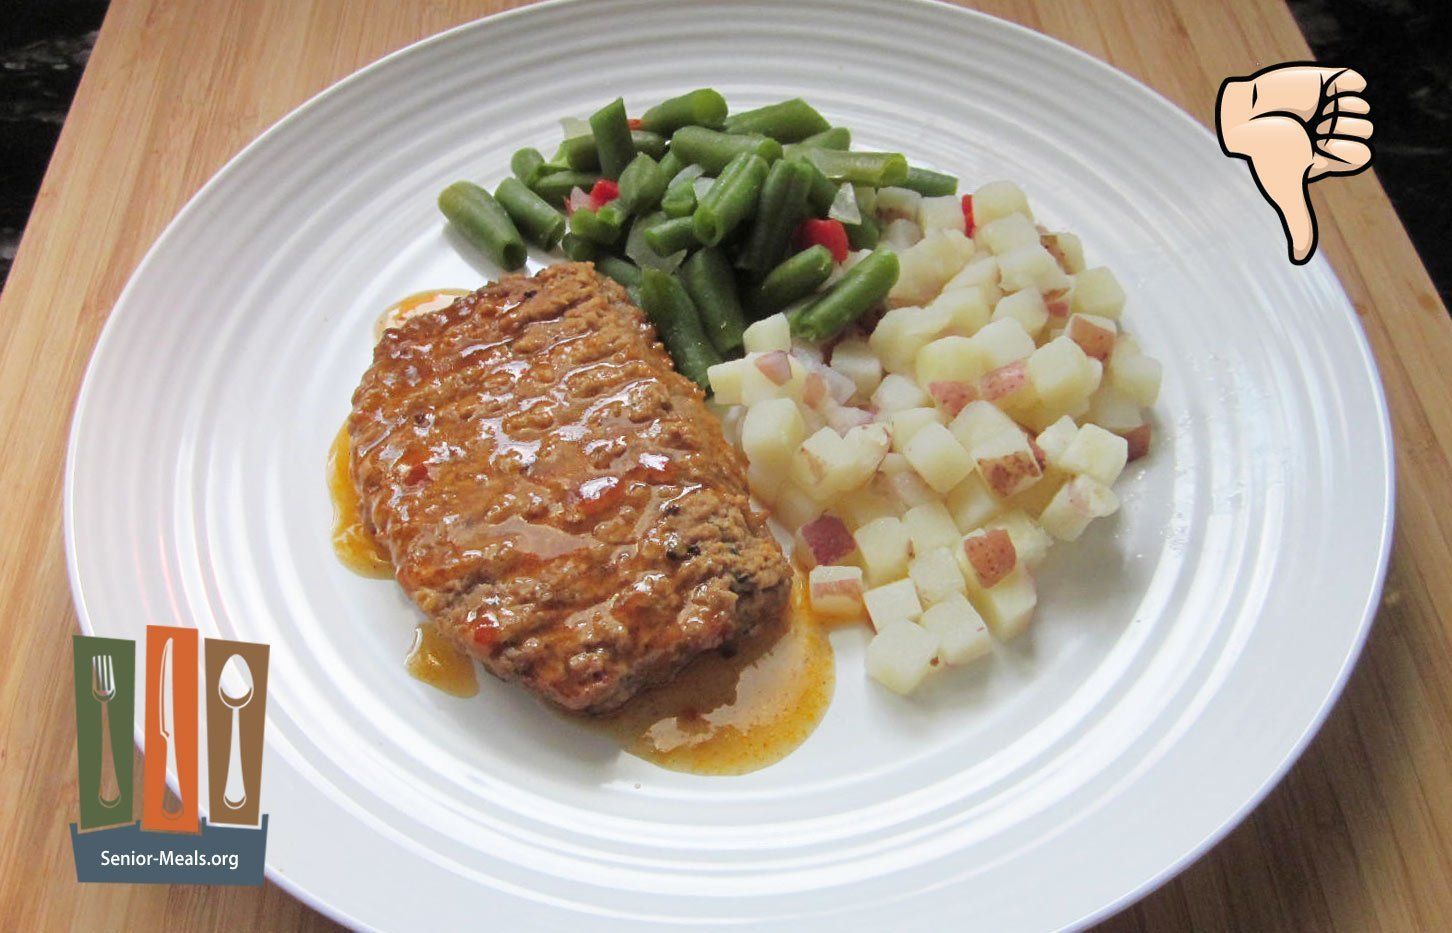 Chipotle Meatloaf with Red Skin Potatoes and Green Beans with Onion and Peppers - $11.50